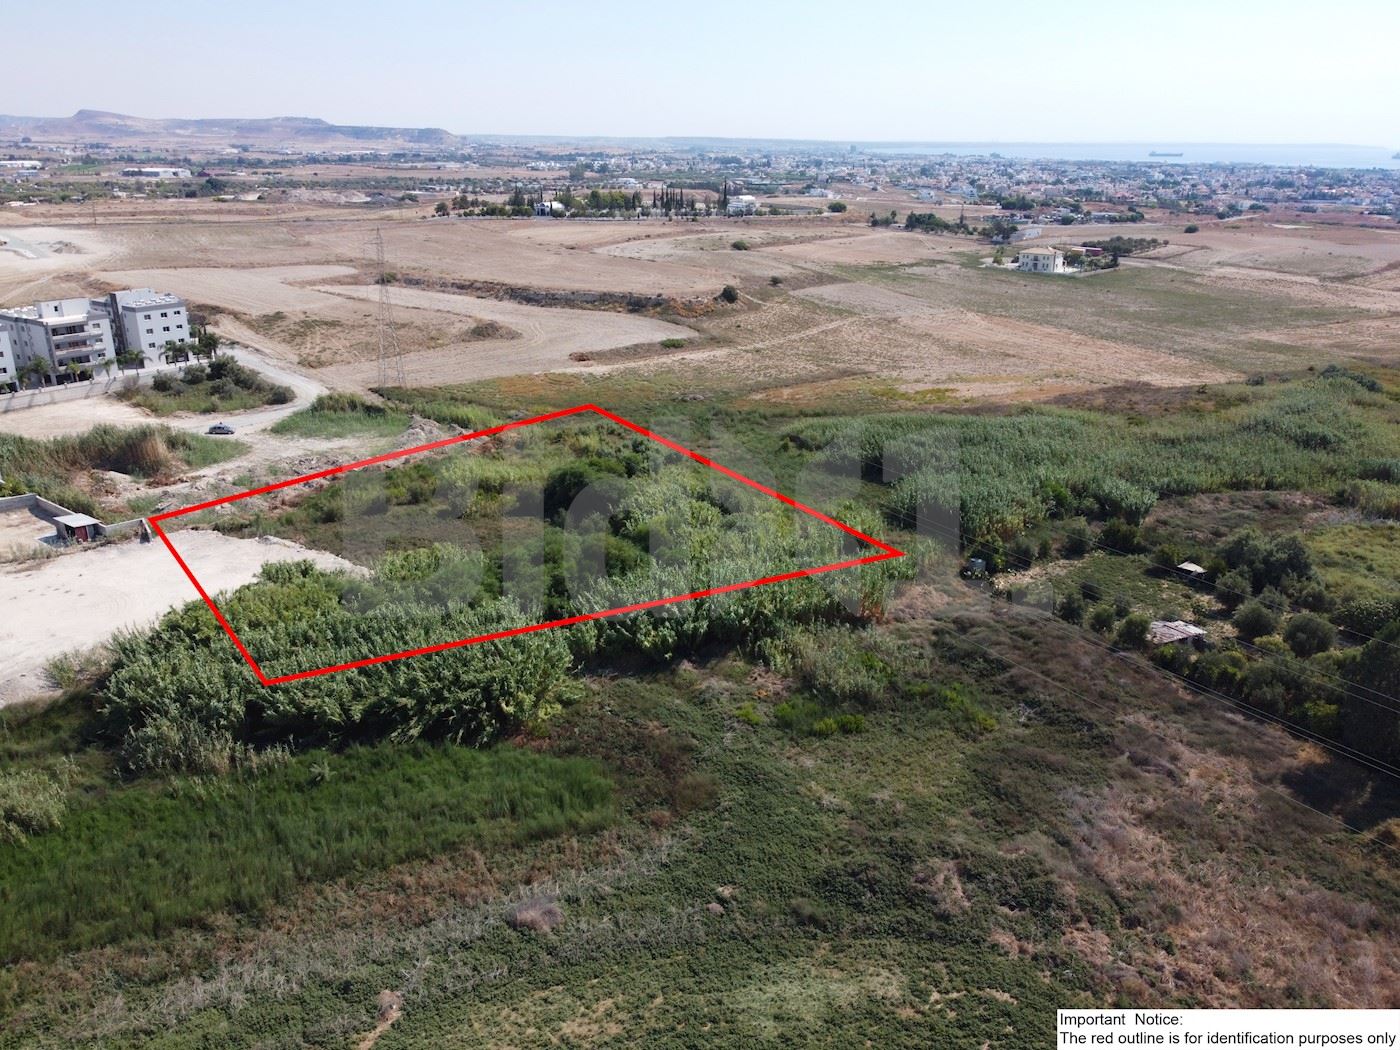 Residential/Agricultural field in Aradippou, Larnaca 1/6